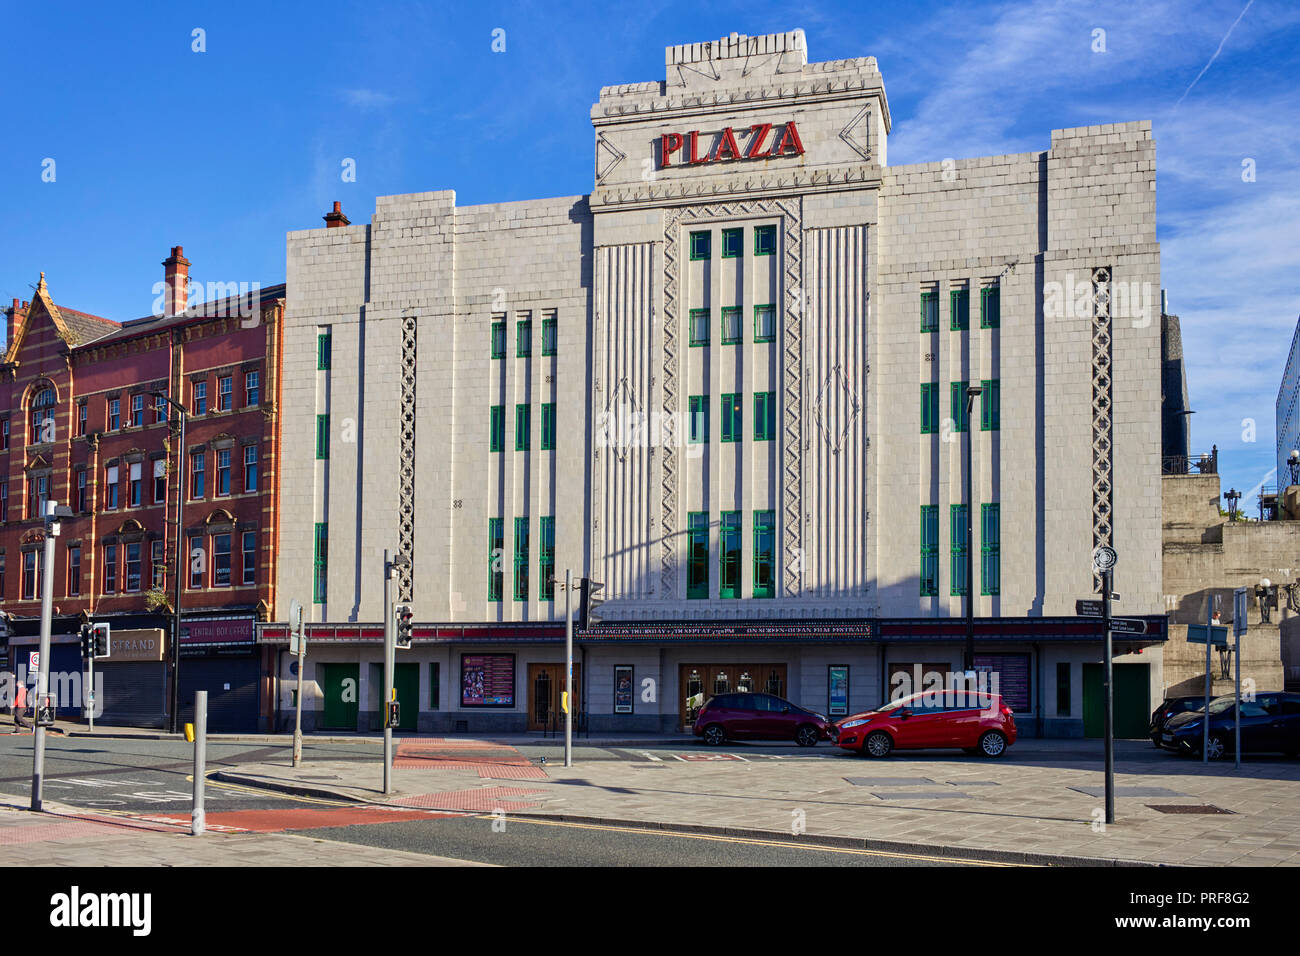 Grade II listed Plaza cinema and variety theatre in Stockport Stock Photo